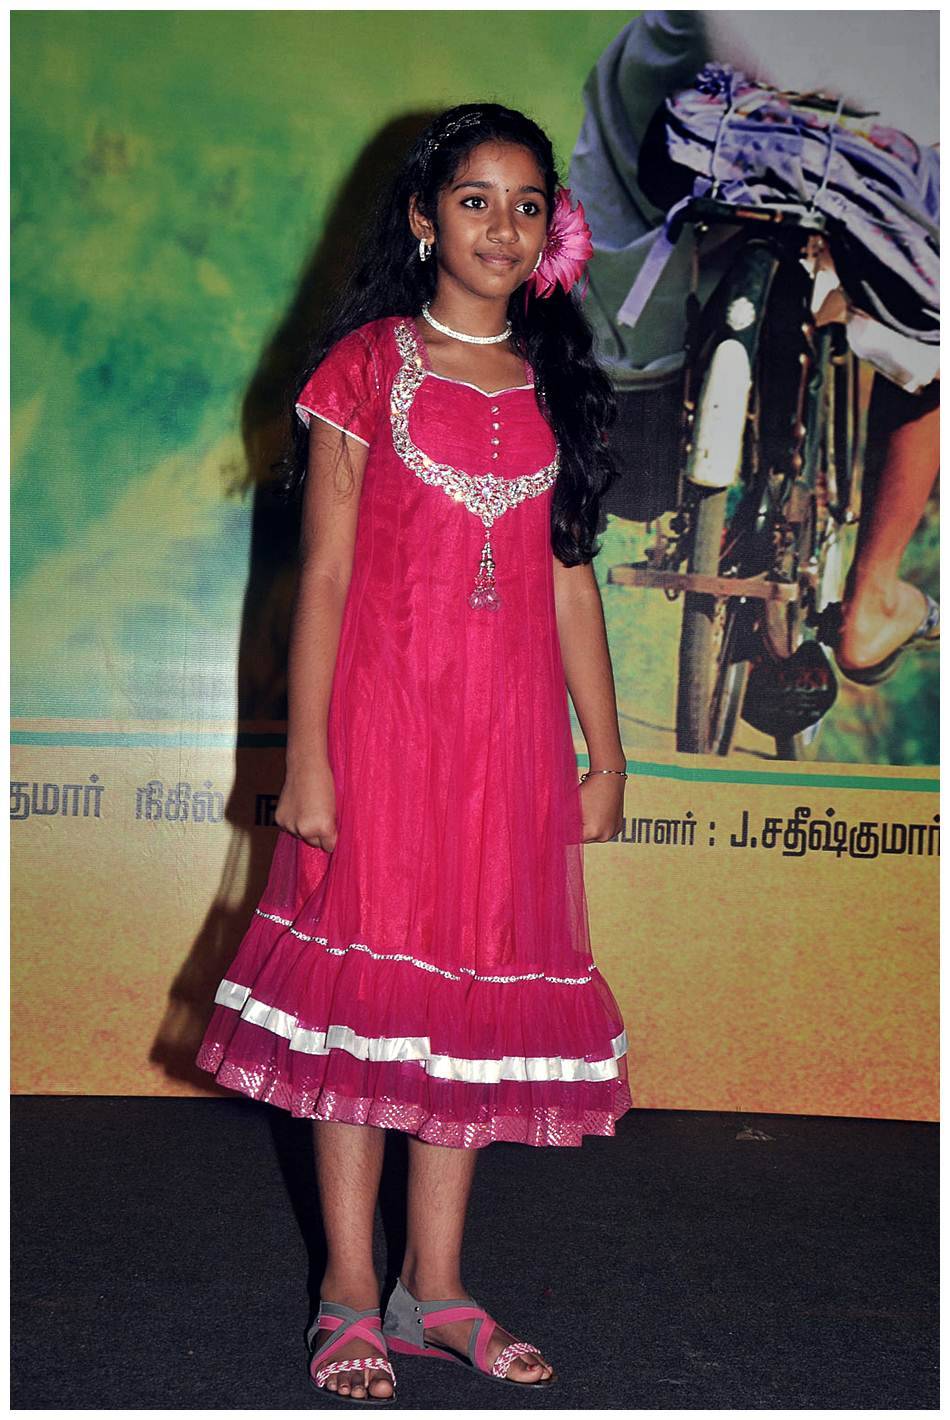 Baby Sadhana - Thanga Meenkal Movie Audio Launch Pictures | Picture 445765